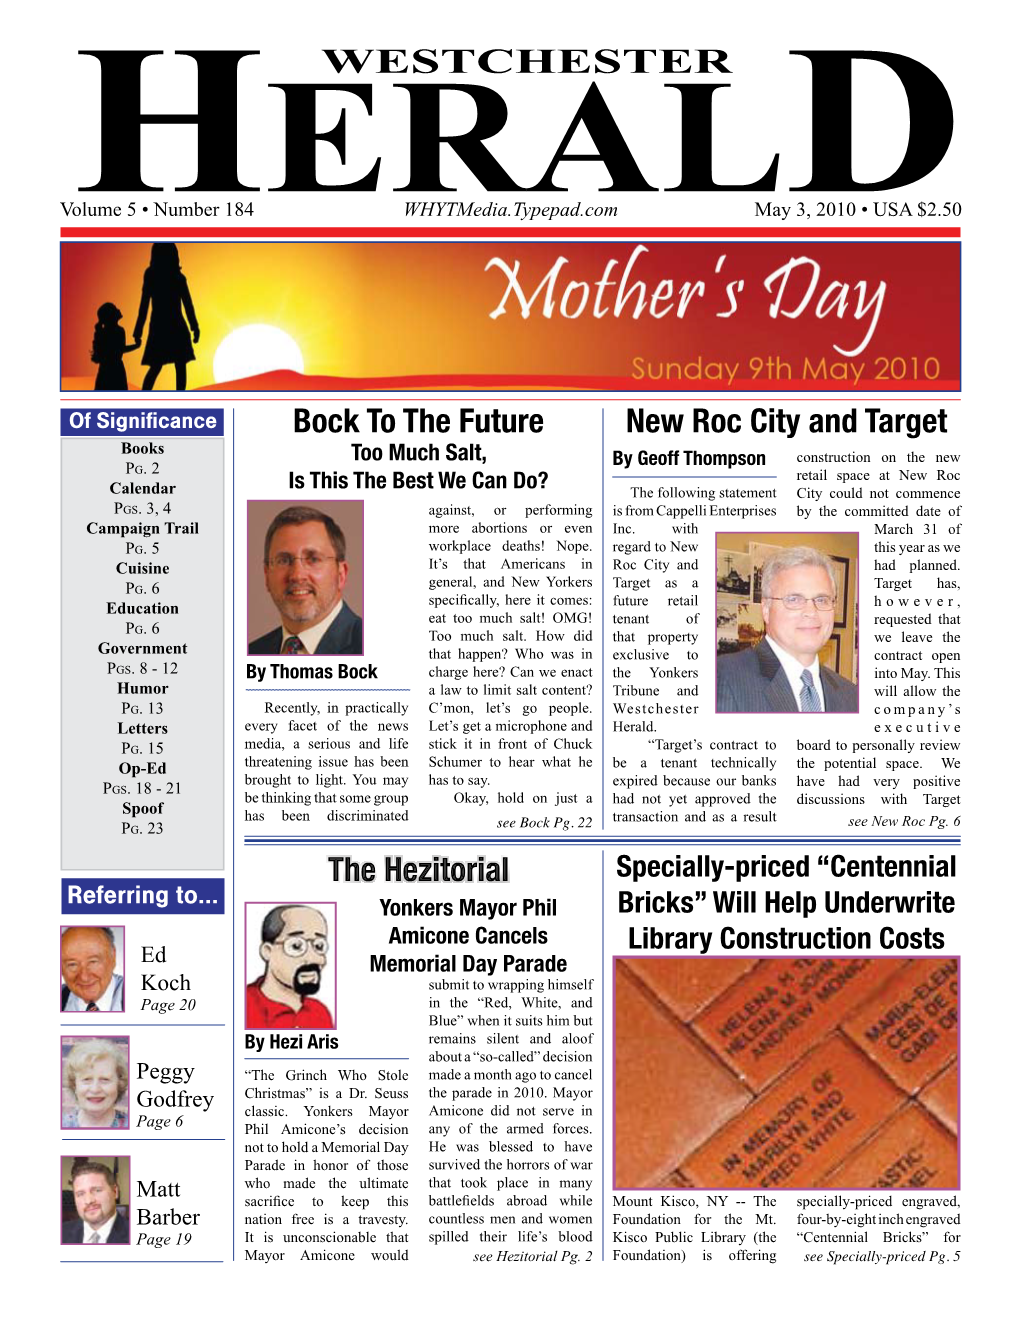 Read the May 3, 2010 Edition of the Westchester